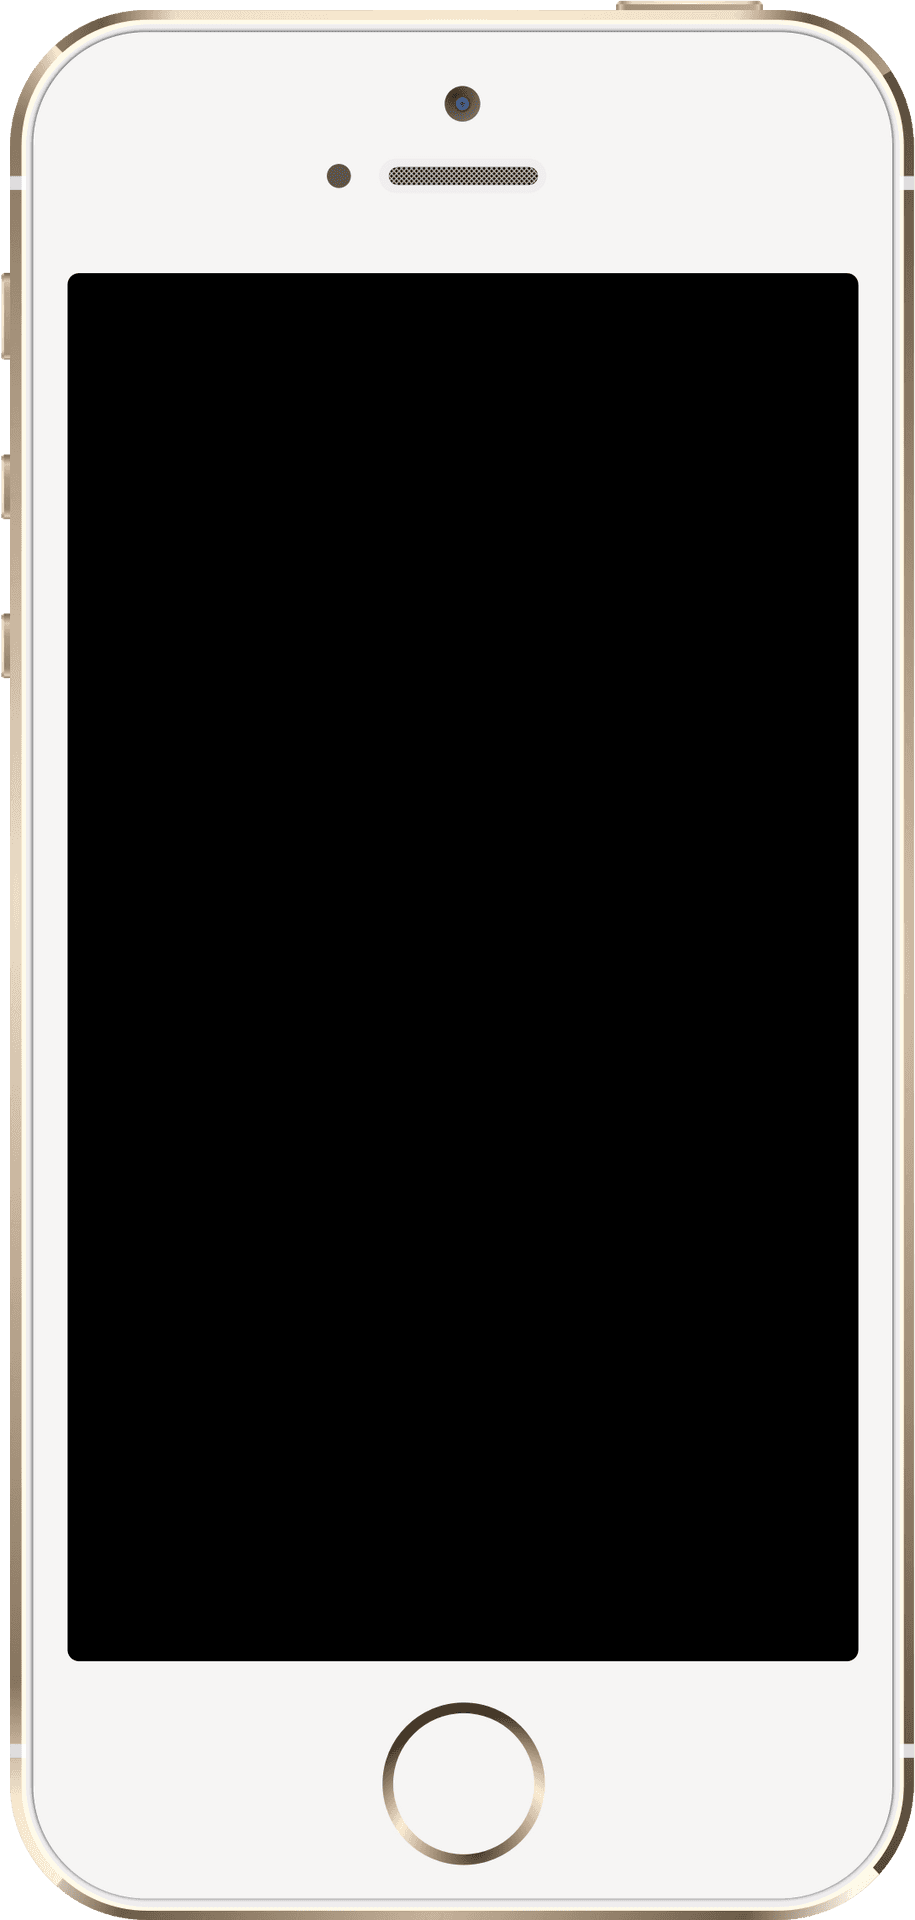 Goldi Phonewith Blank Screen PNG image